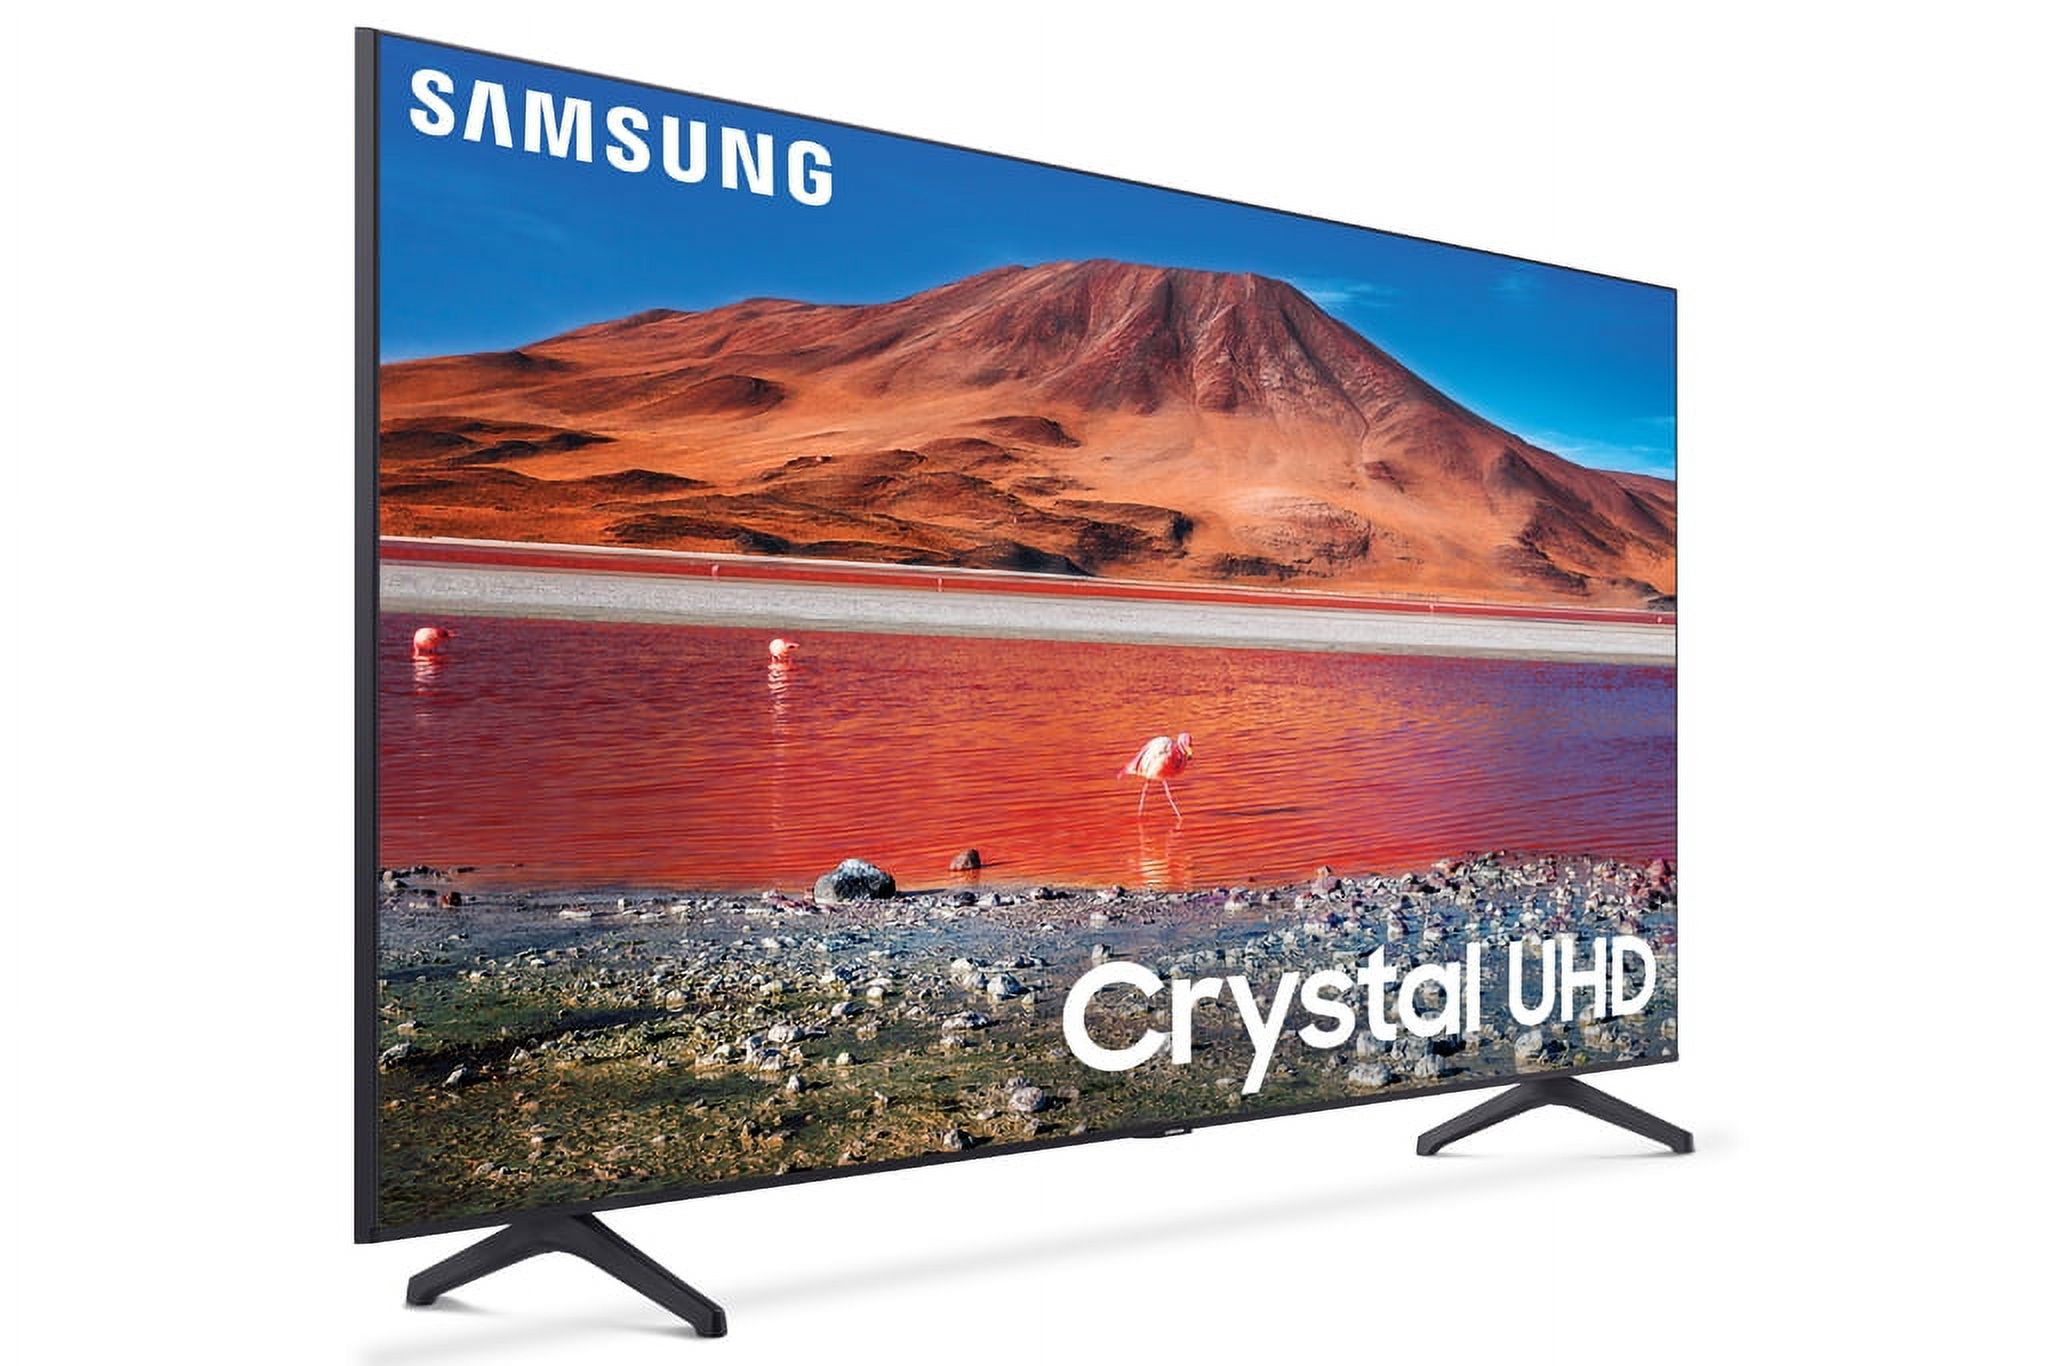 SAMSUNG 70" Class 4K Crystal UHD (2160P) LED Smart TV with HDR UN70TU7000 2020 - image 4 of 18